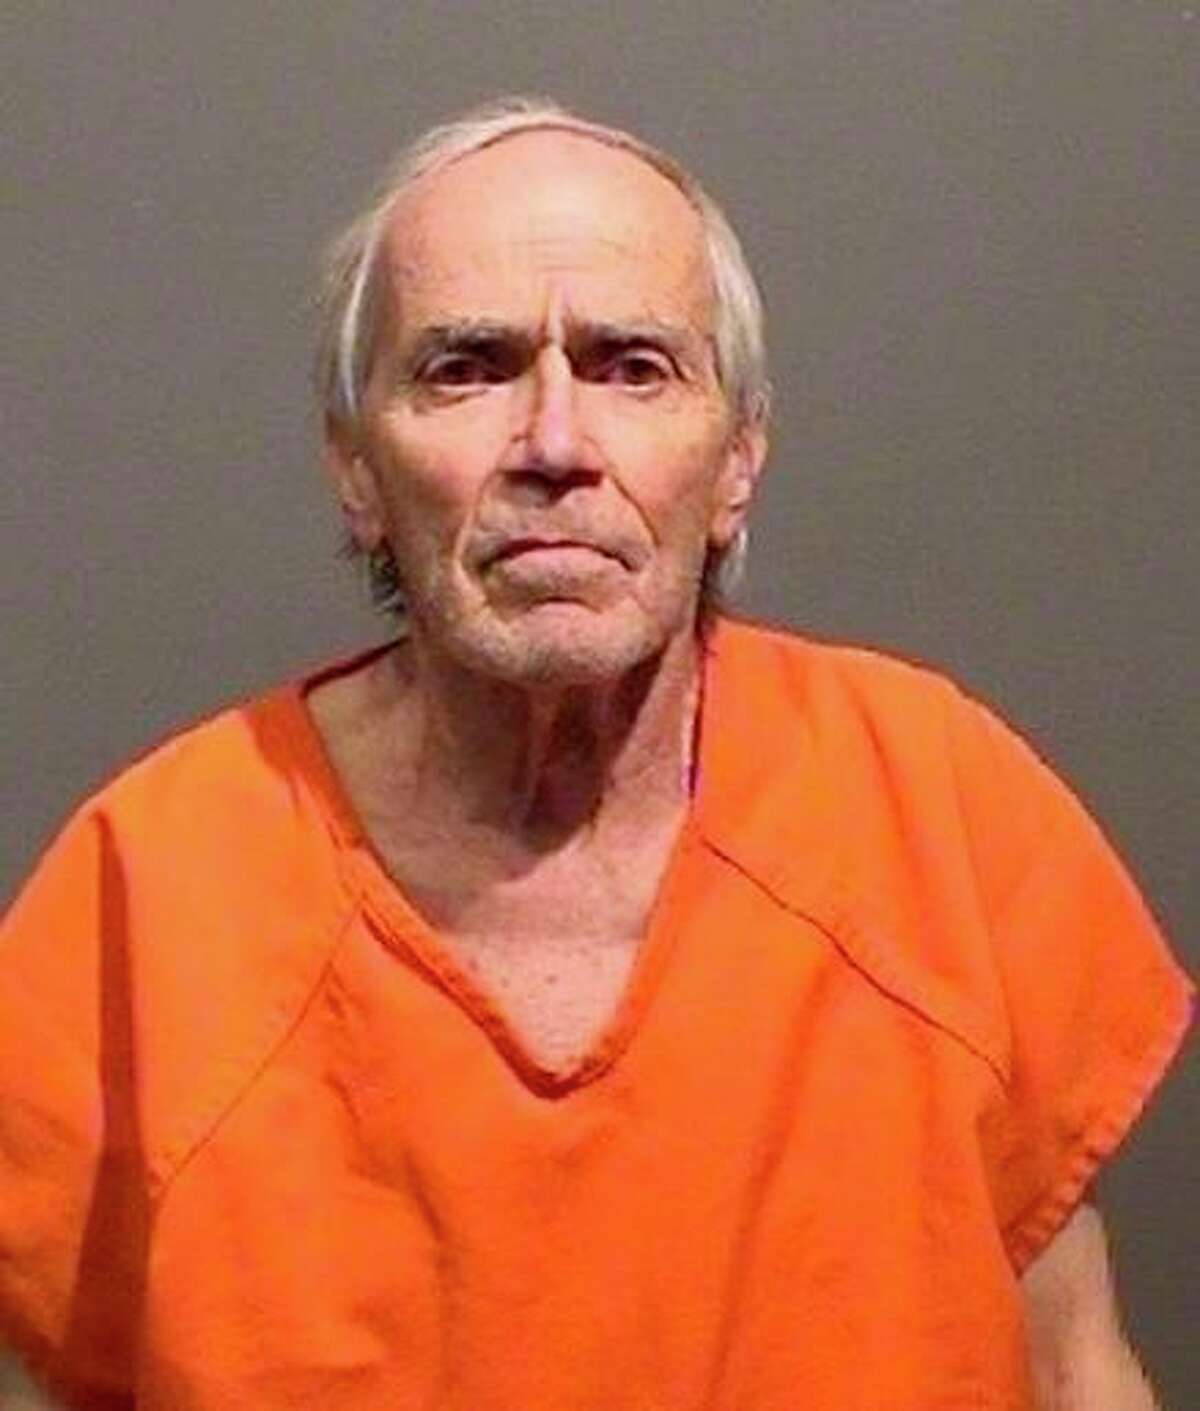 Mark Stanley Personette of Colorado was arraigned in San Francisco Superior Court in a 1978 homicide case.